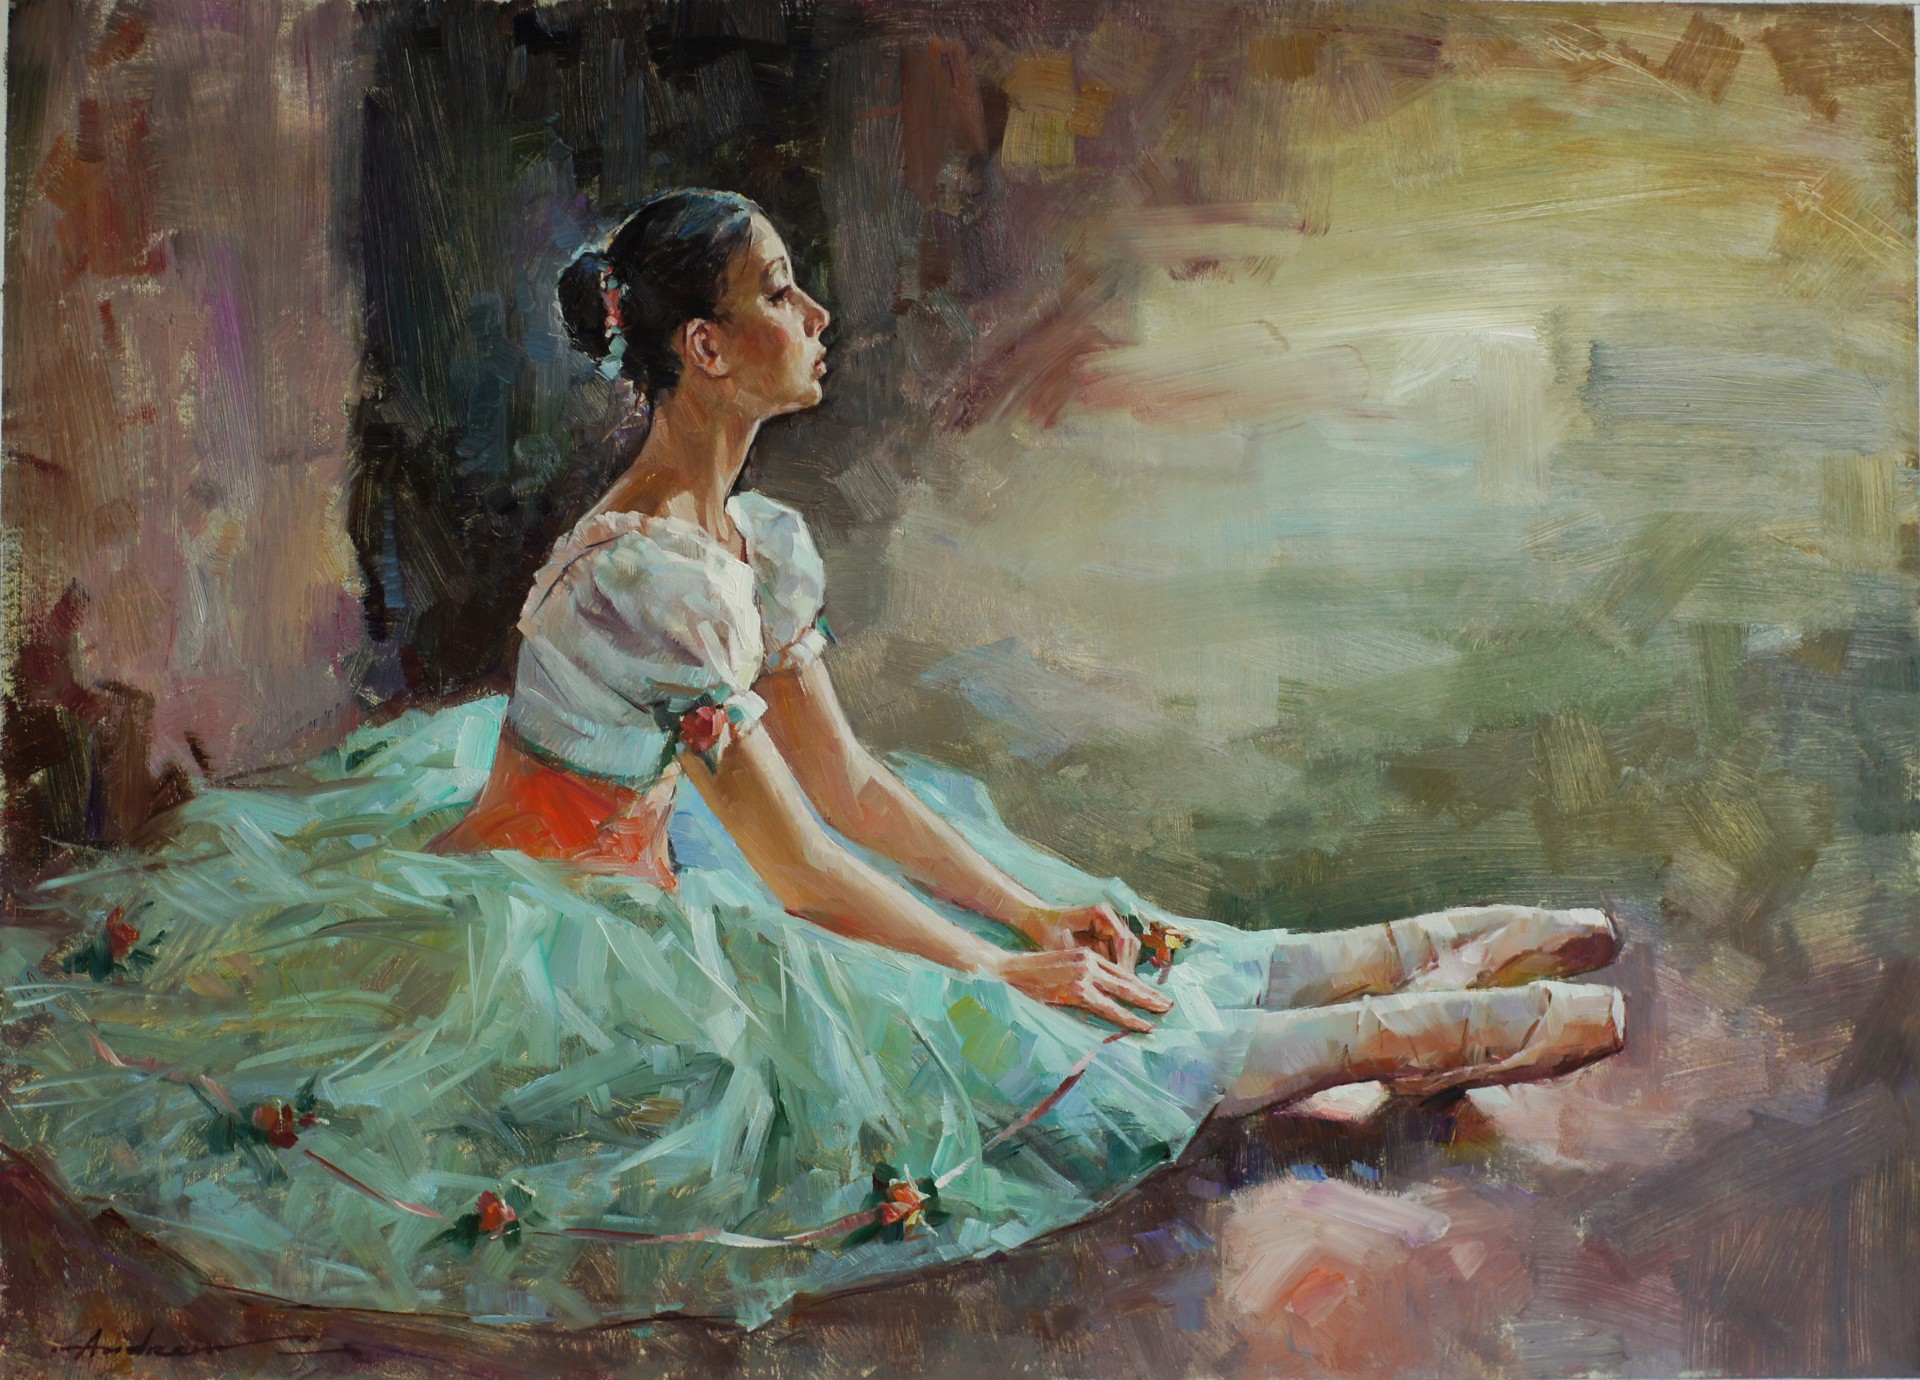 Dreaming of The Future by ANDREW ATROSHENKO